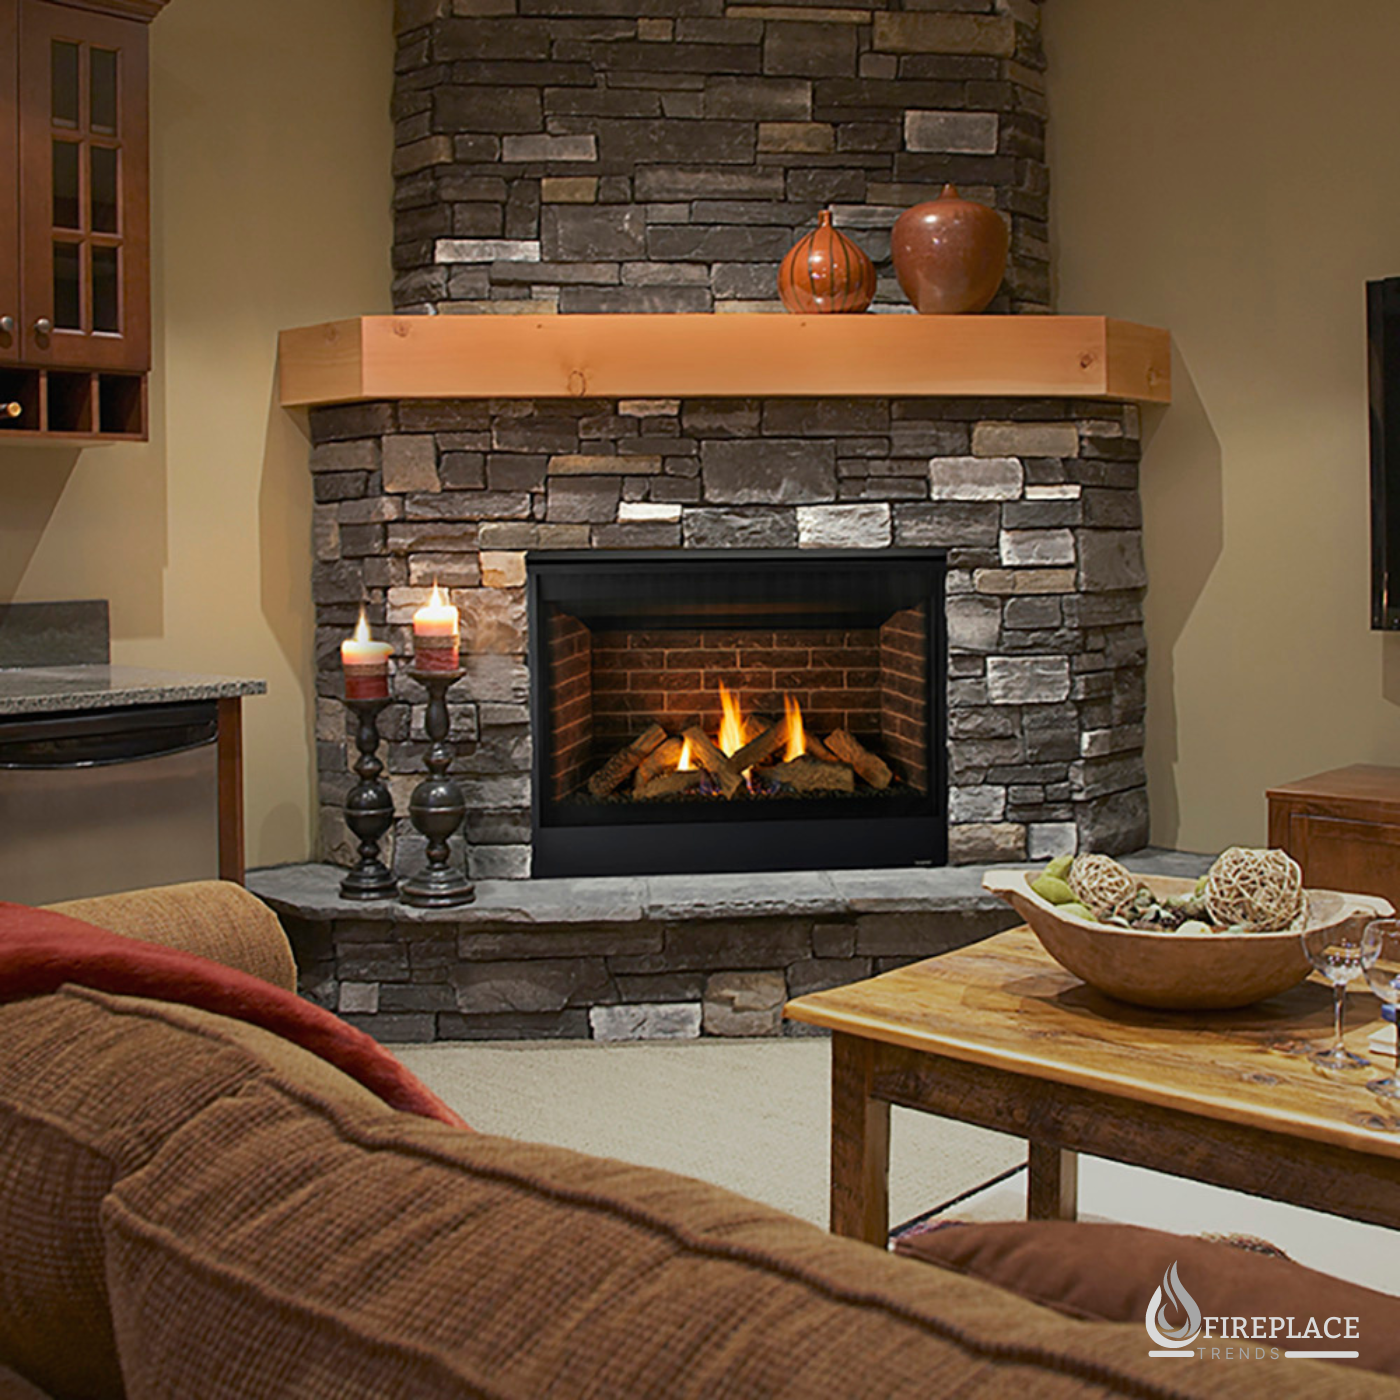 Majestic - Quartz 42" Direct Vent Traditional Gas Fireplace with IntelliFire Touch ignition